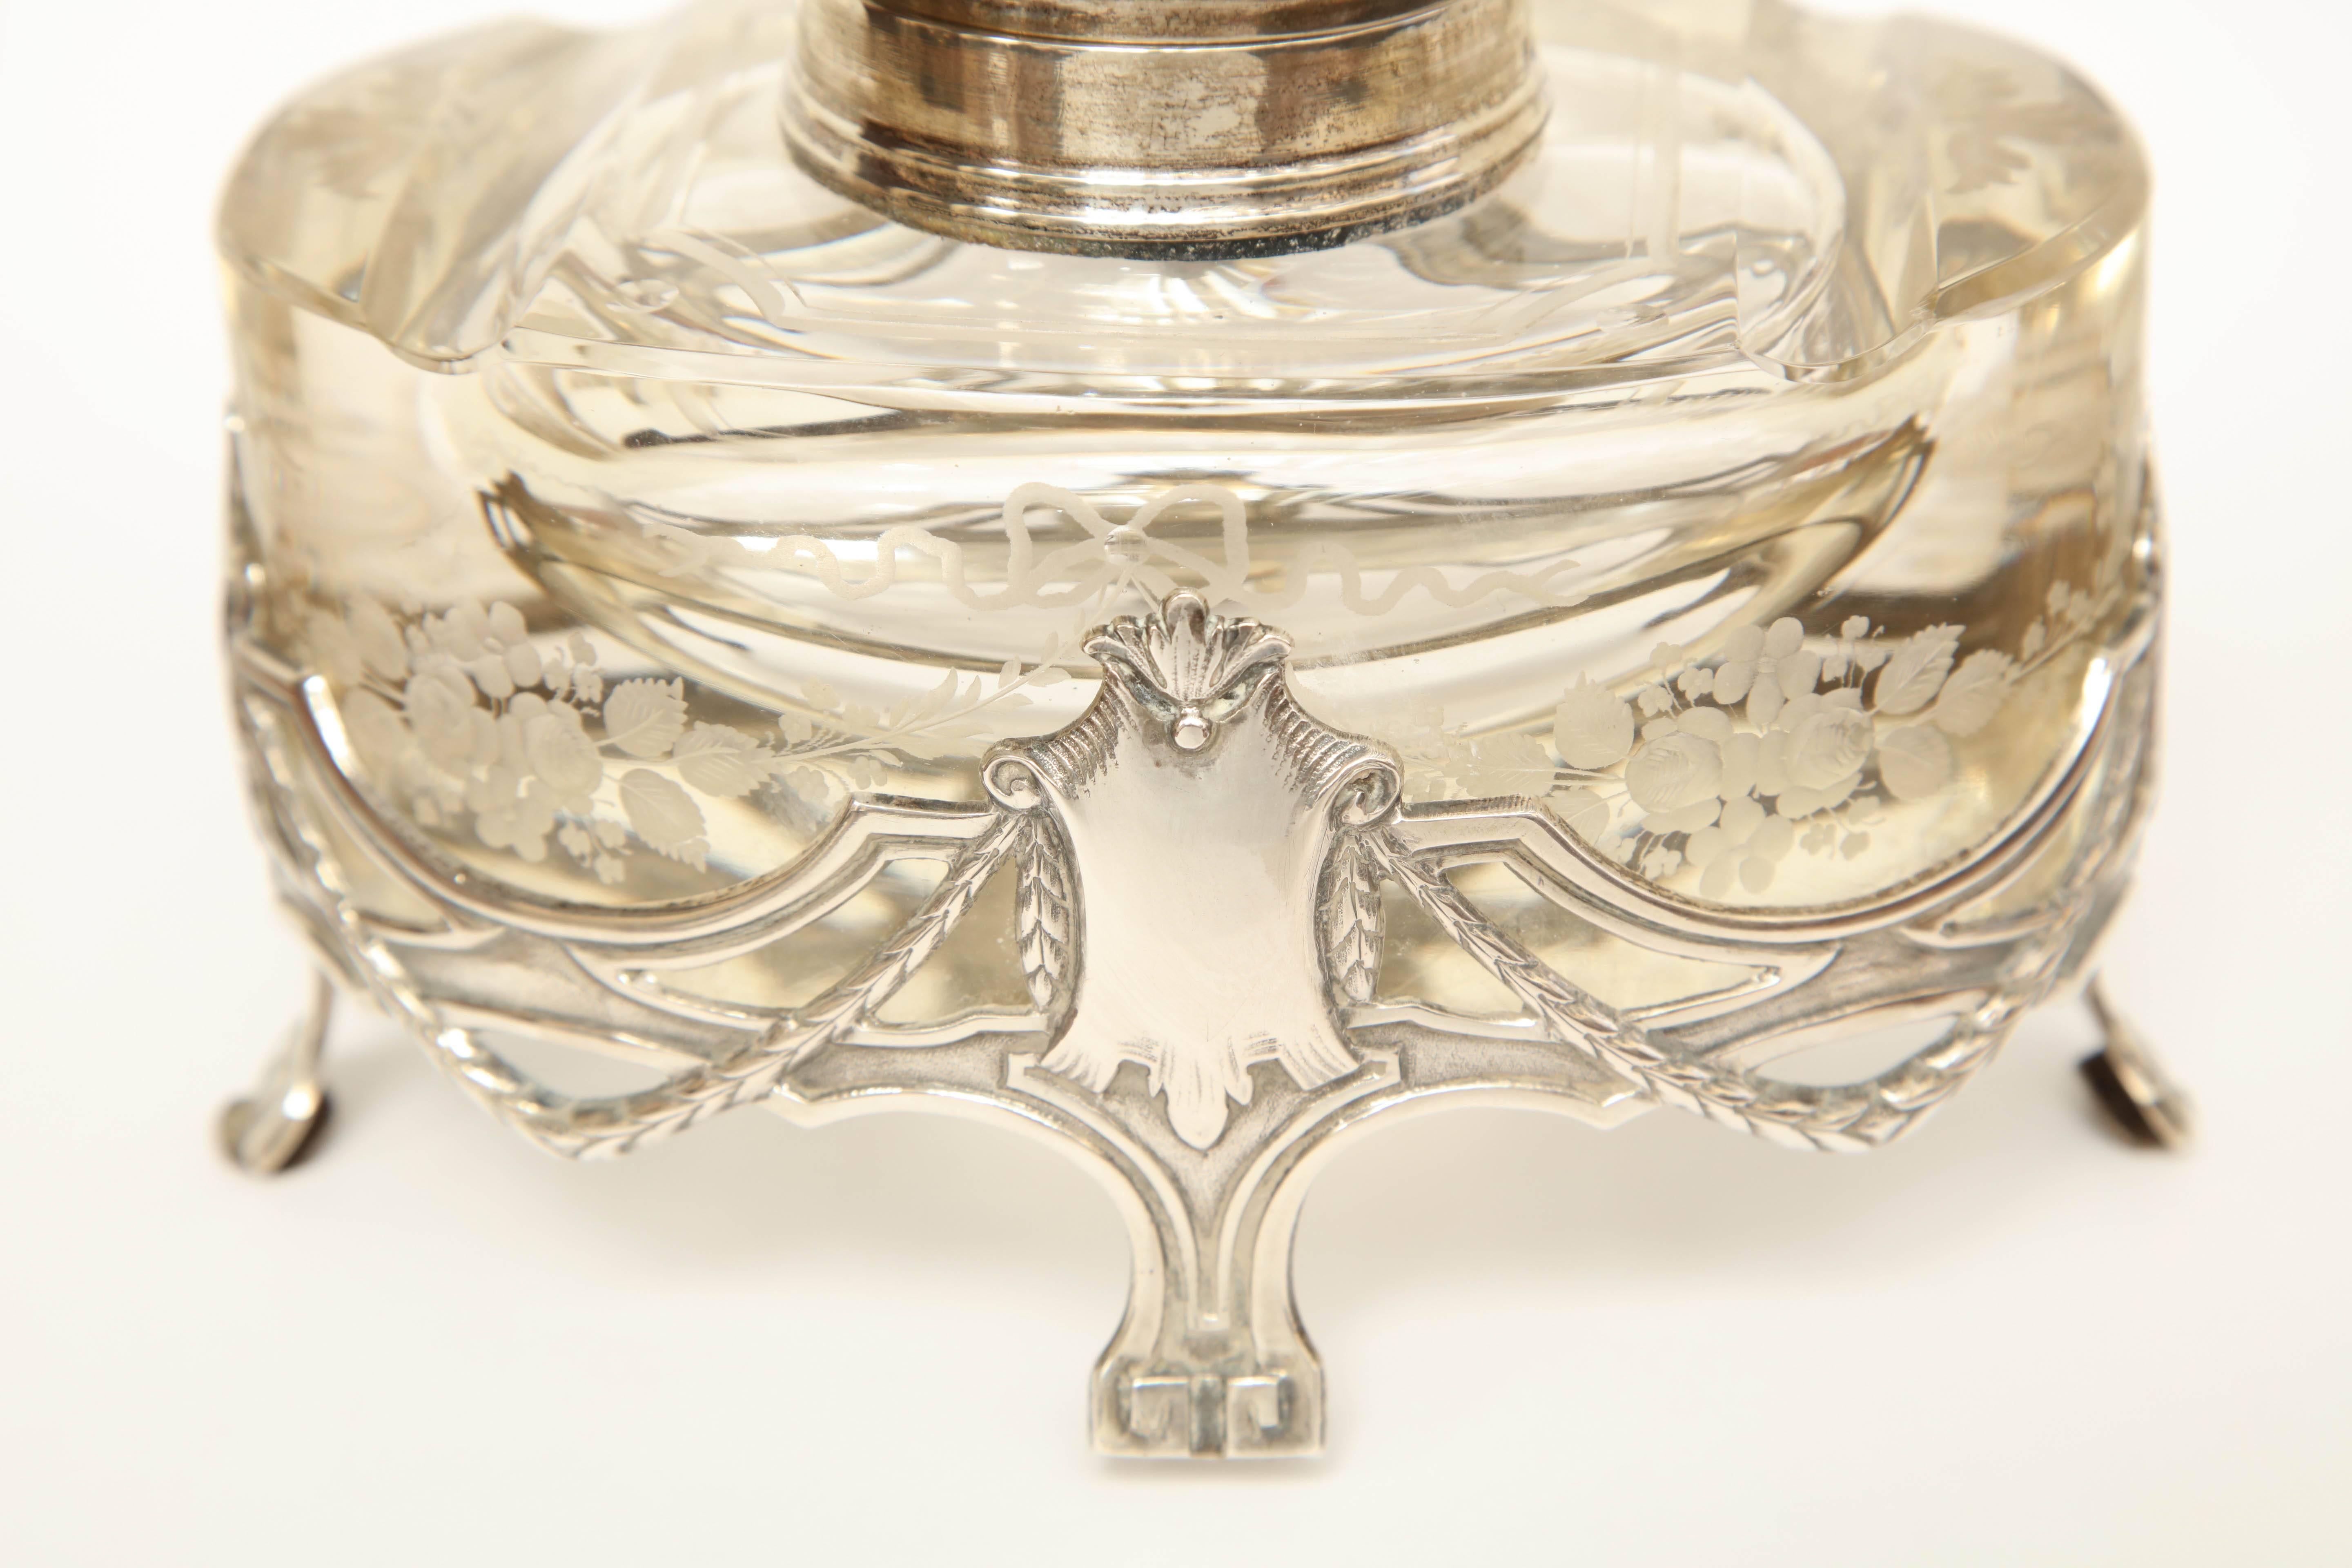 Early 20th century Art Nouveau German silver and glass inkwell.